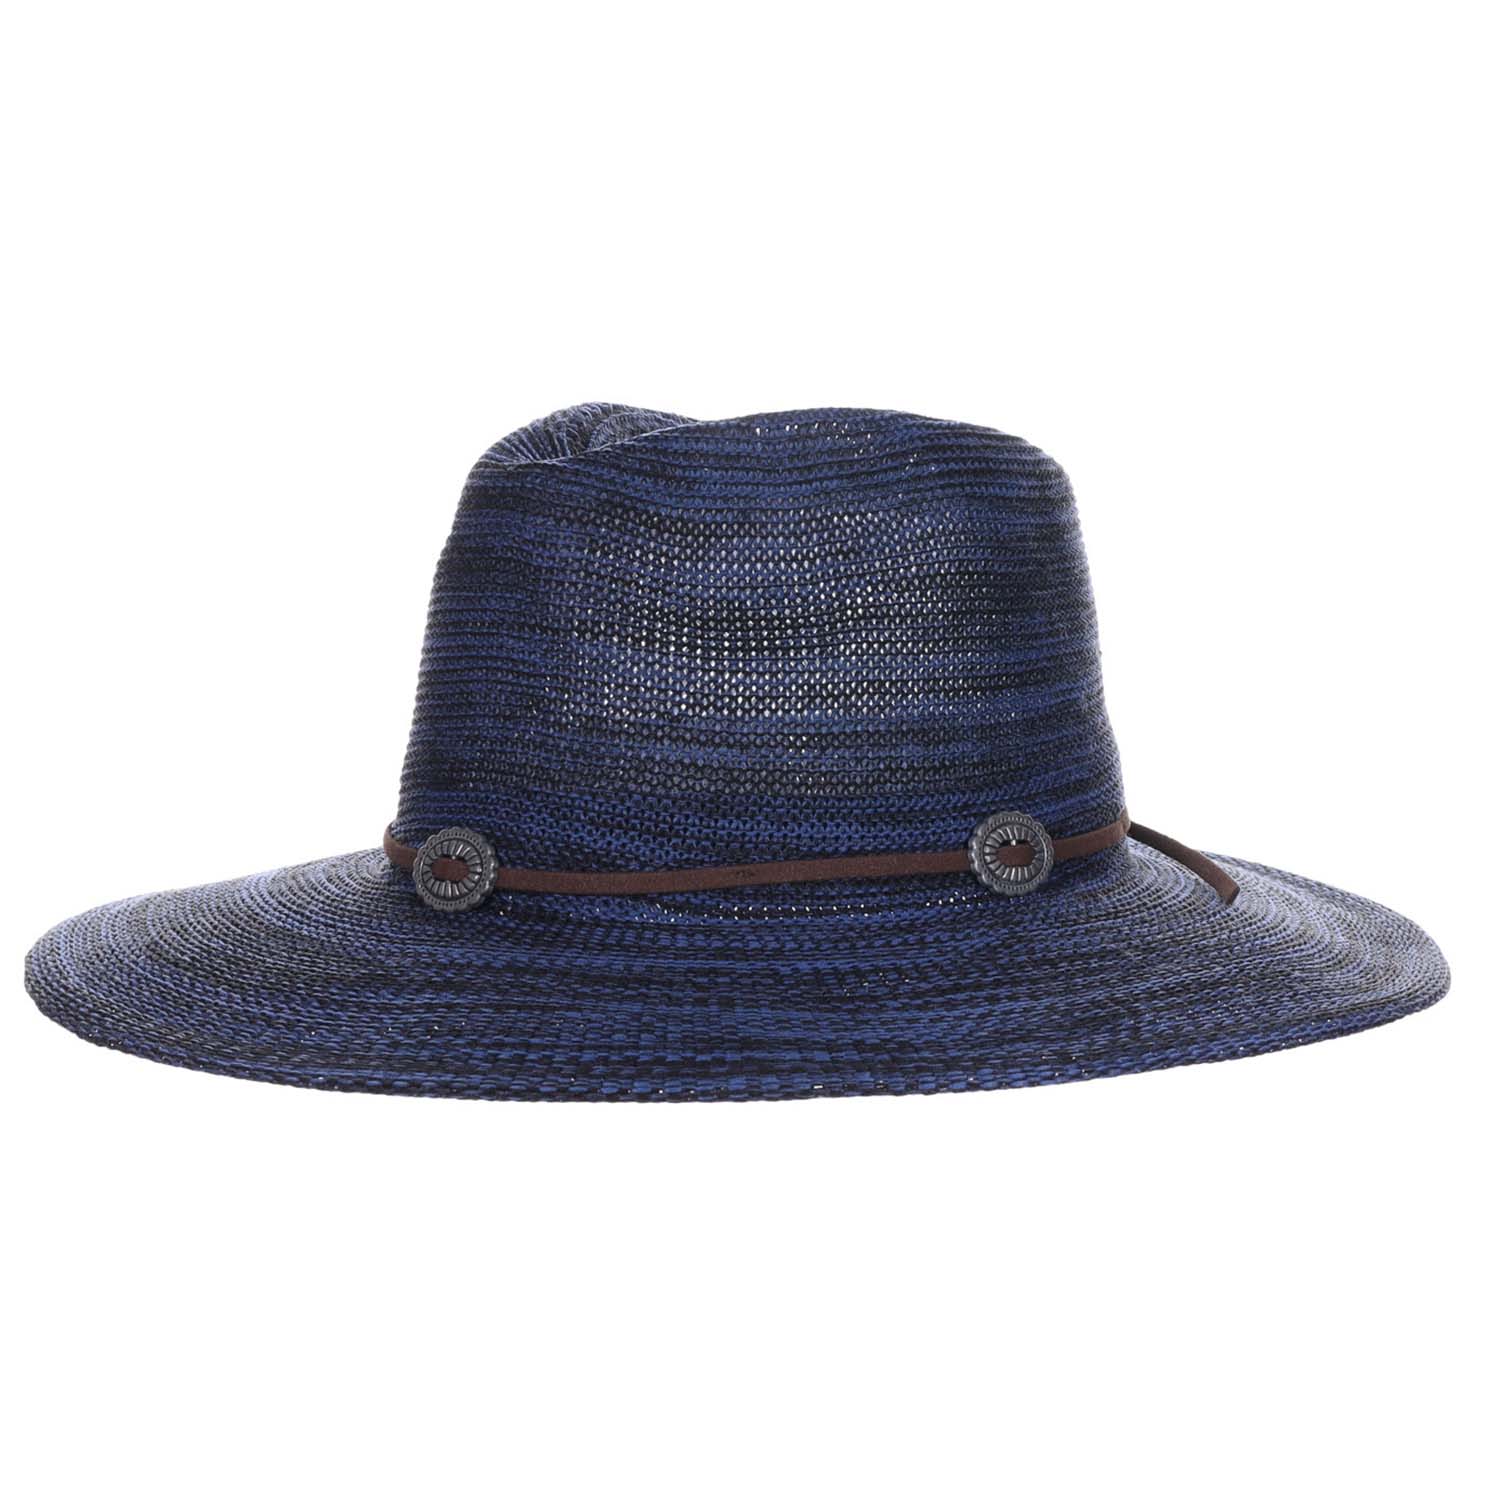 Space Dyed Knit Safari Hat with Conchos - Scala Pronto Safari Hat Scala Hats LW801-NAVY Navy  